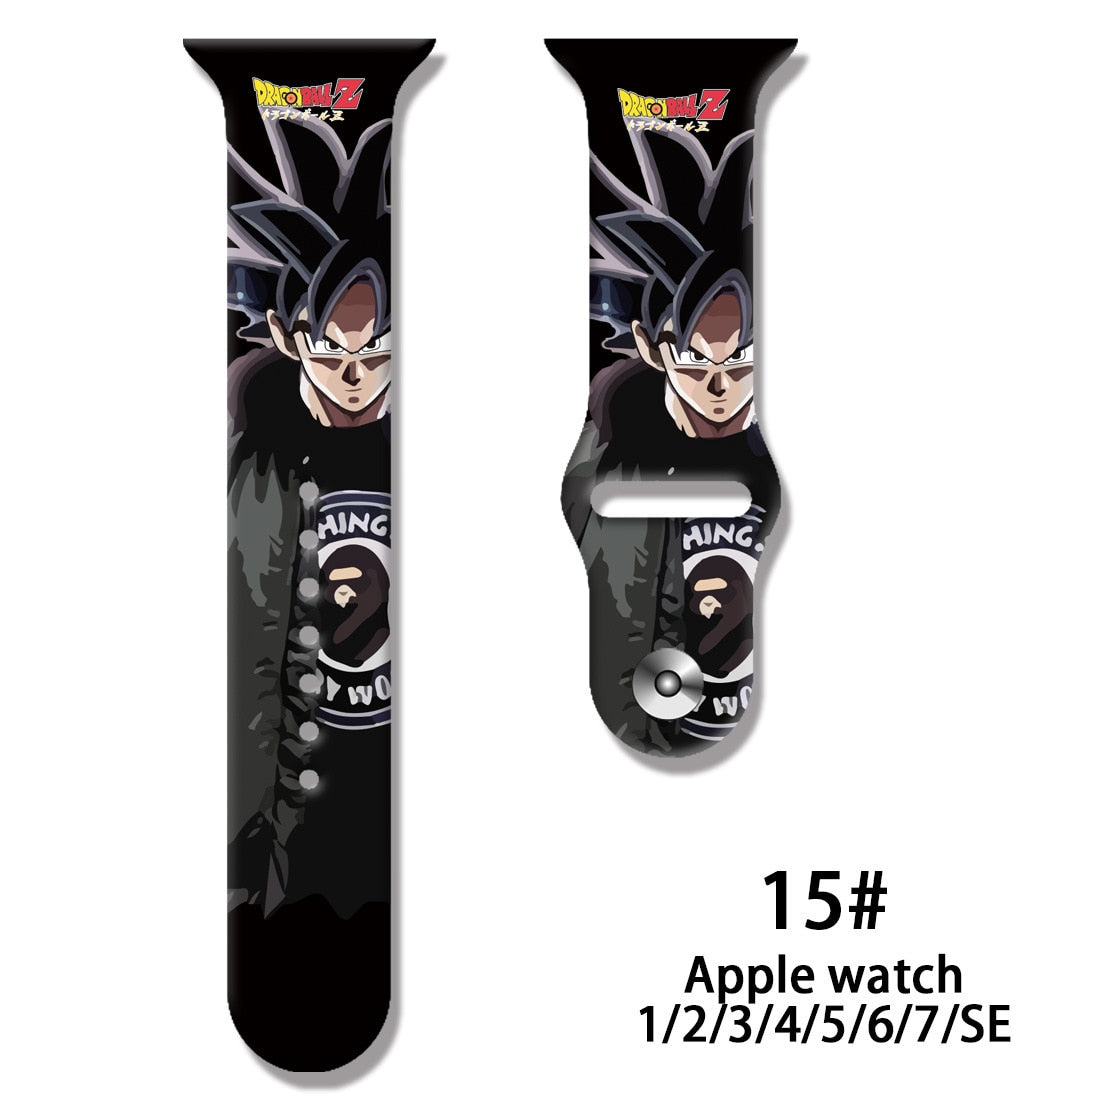 Dragonball Z Anime Strap for Apple Watch band